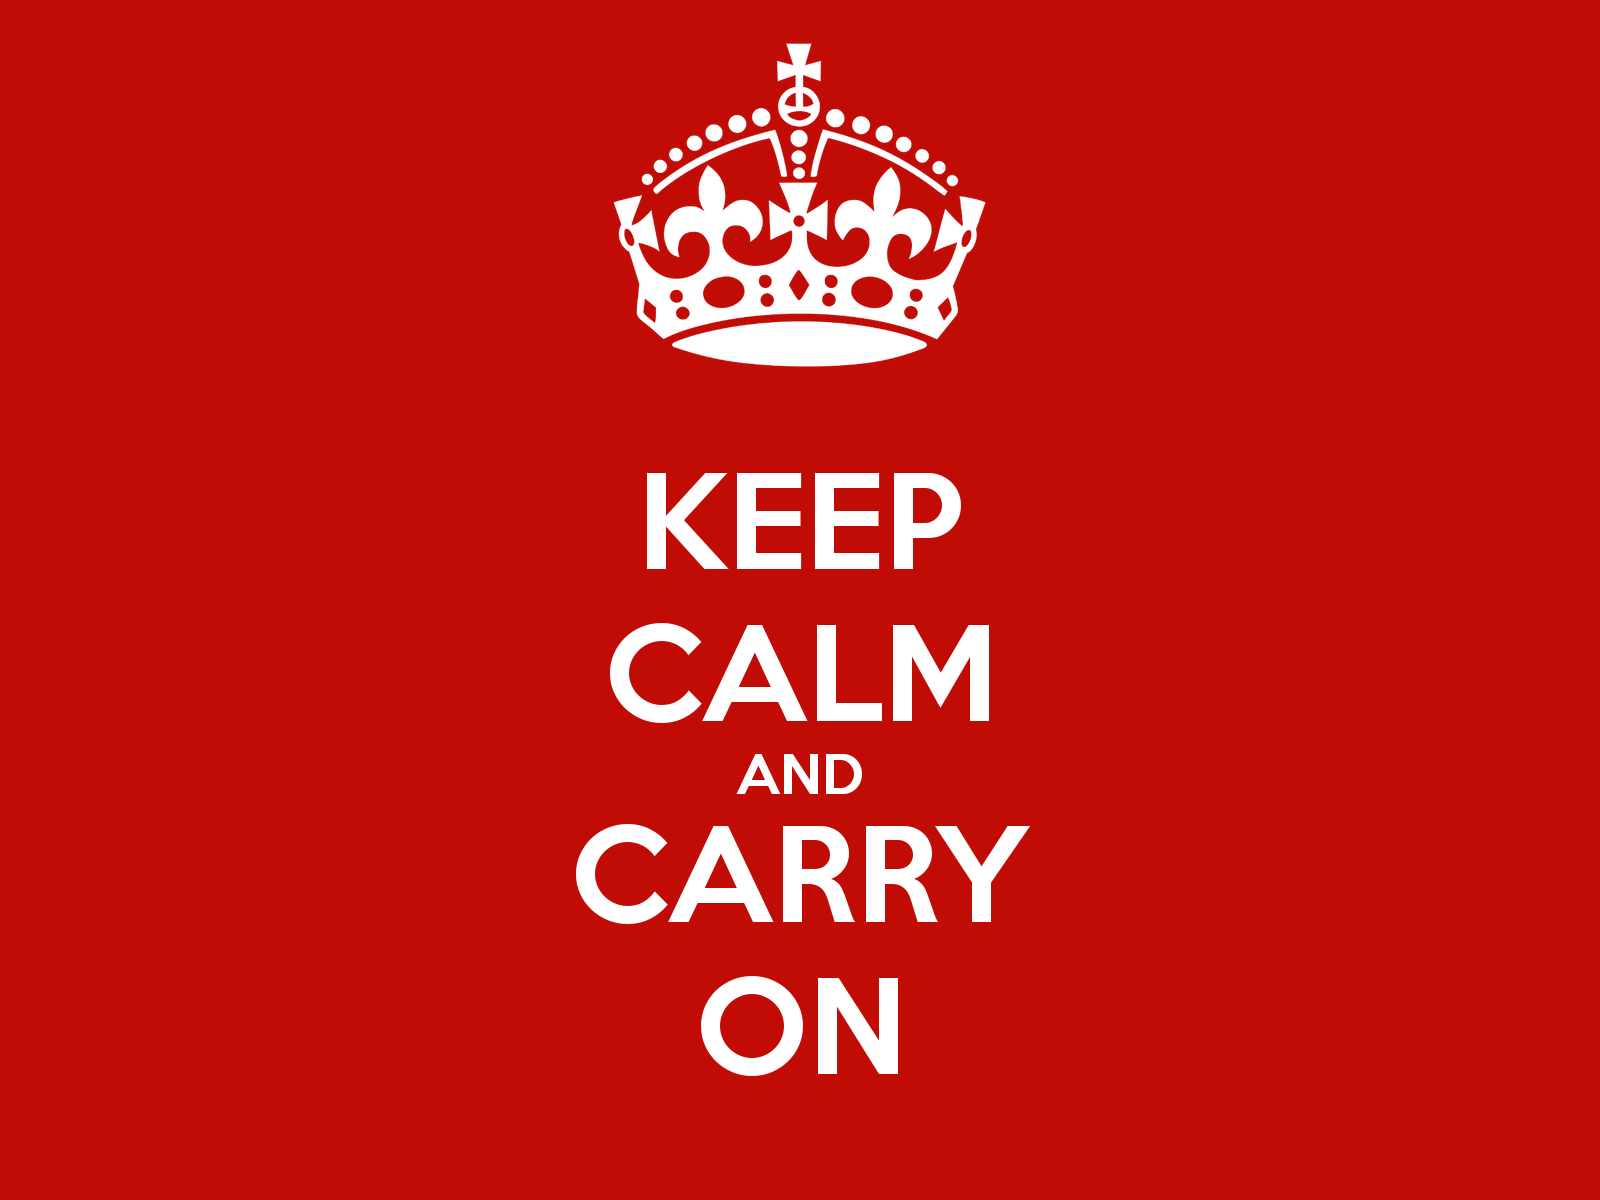 who created keep calm and carry on